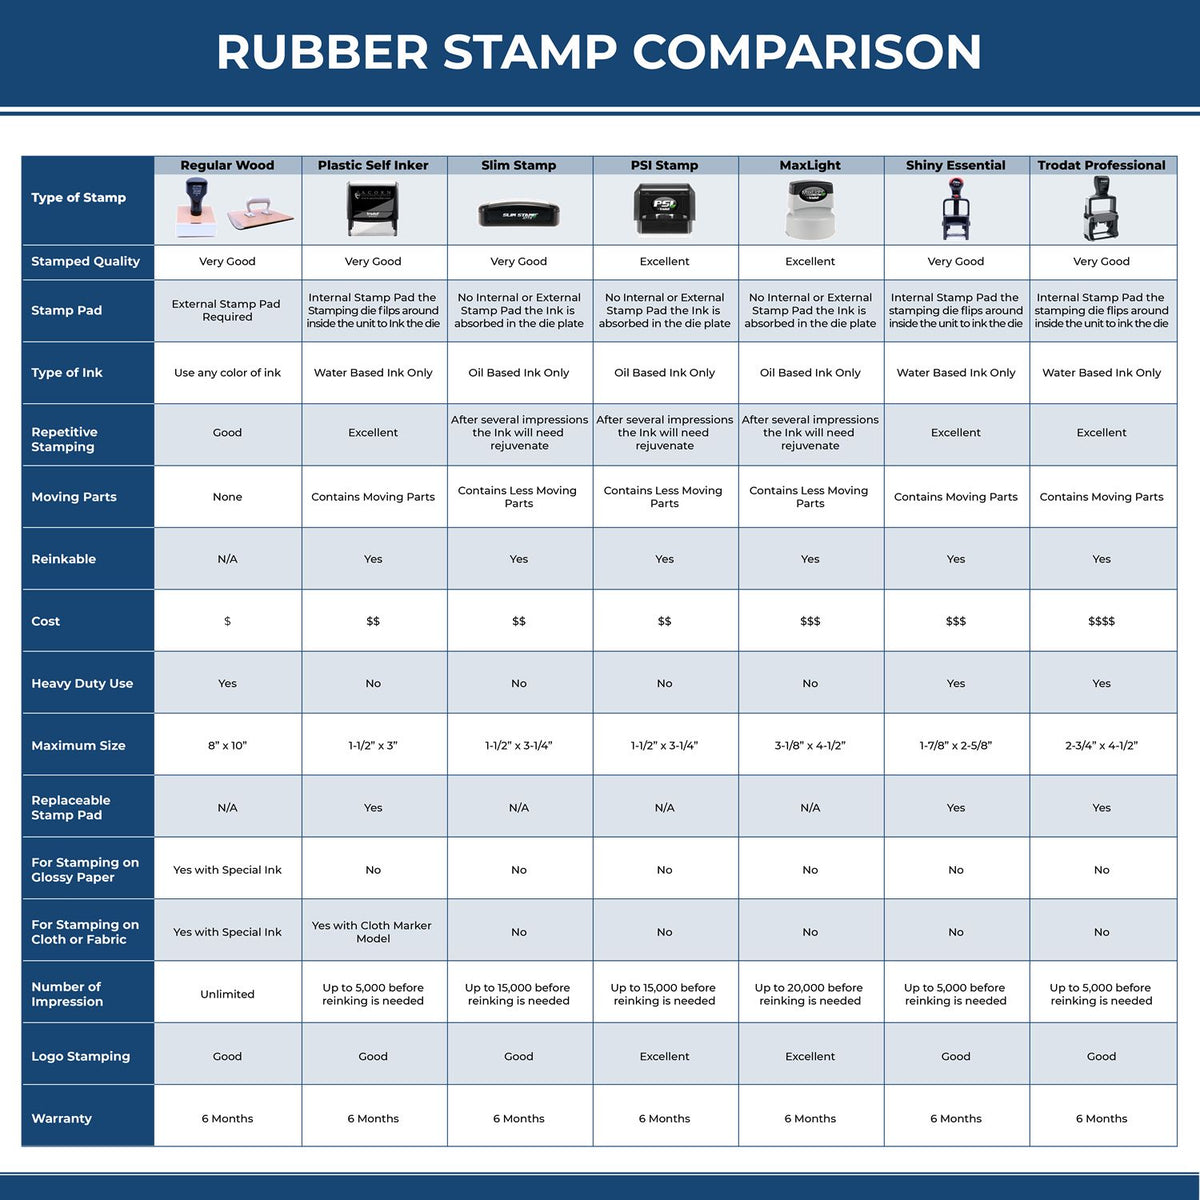 Large Economy Mail Rubber Stamp 4852R Rubber Stamp Comparison